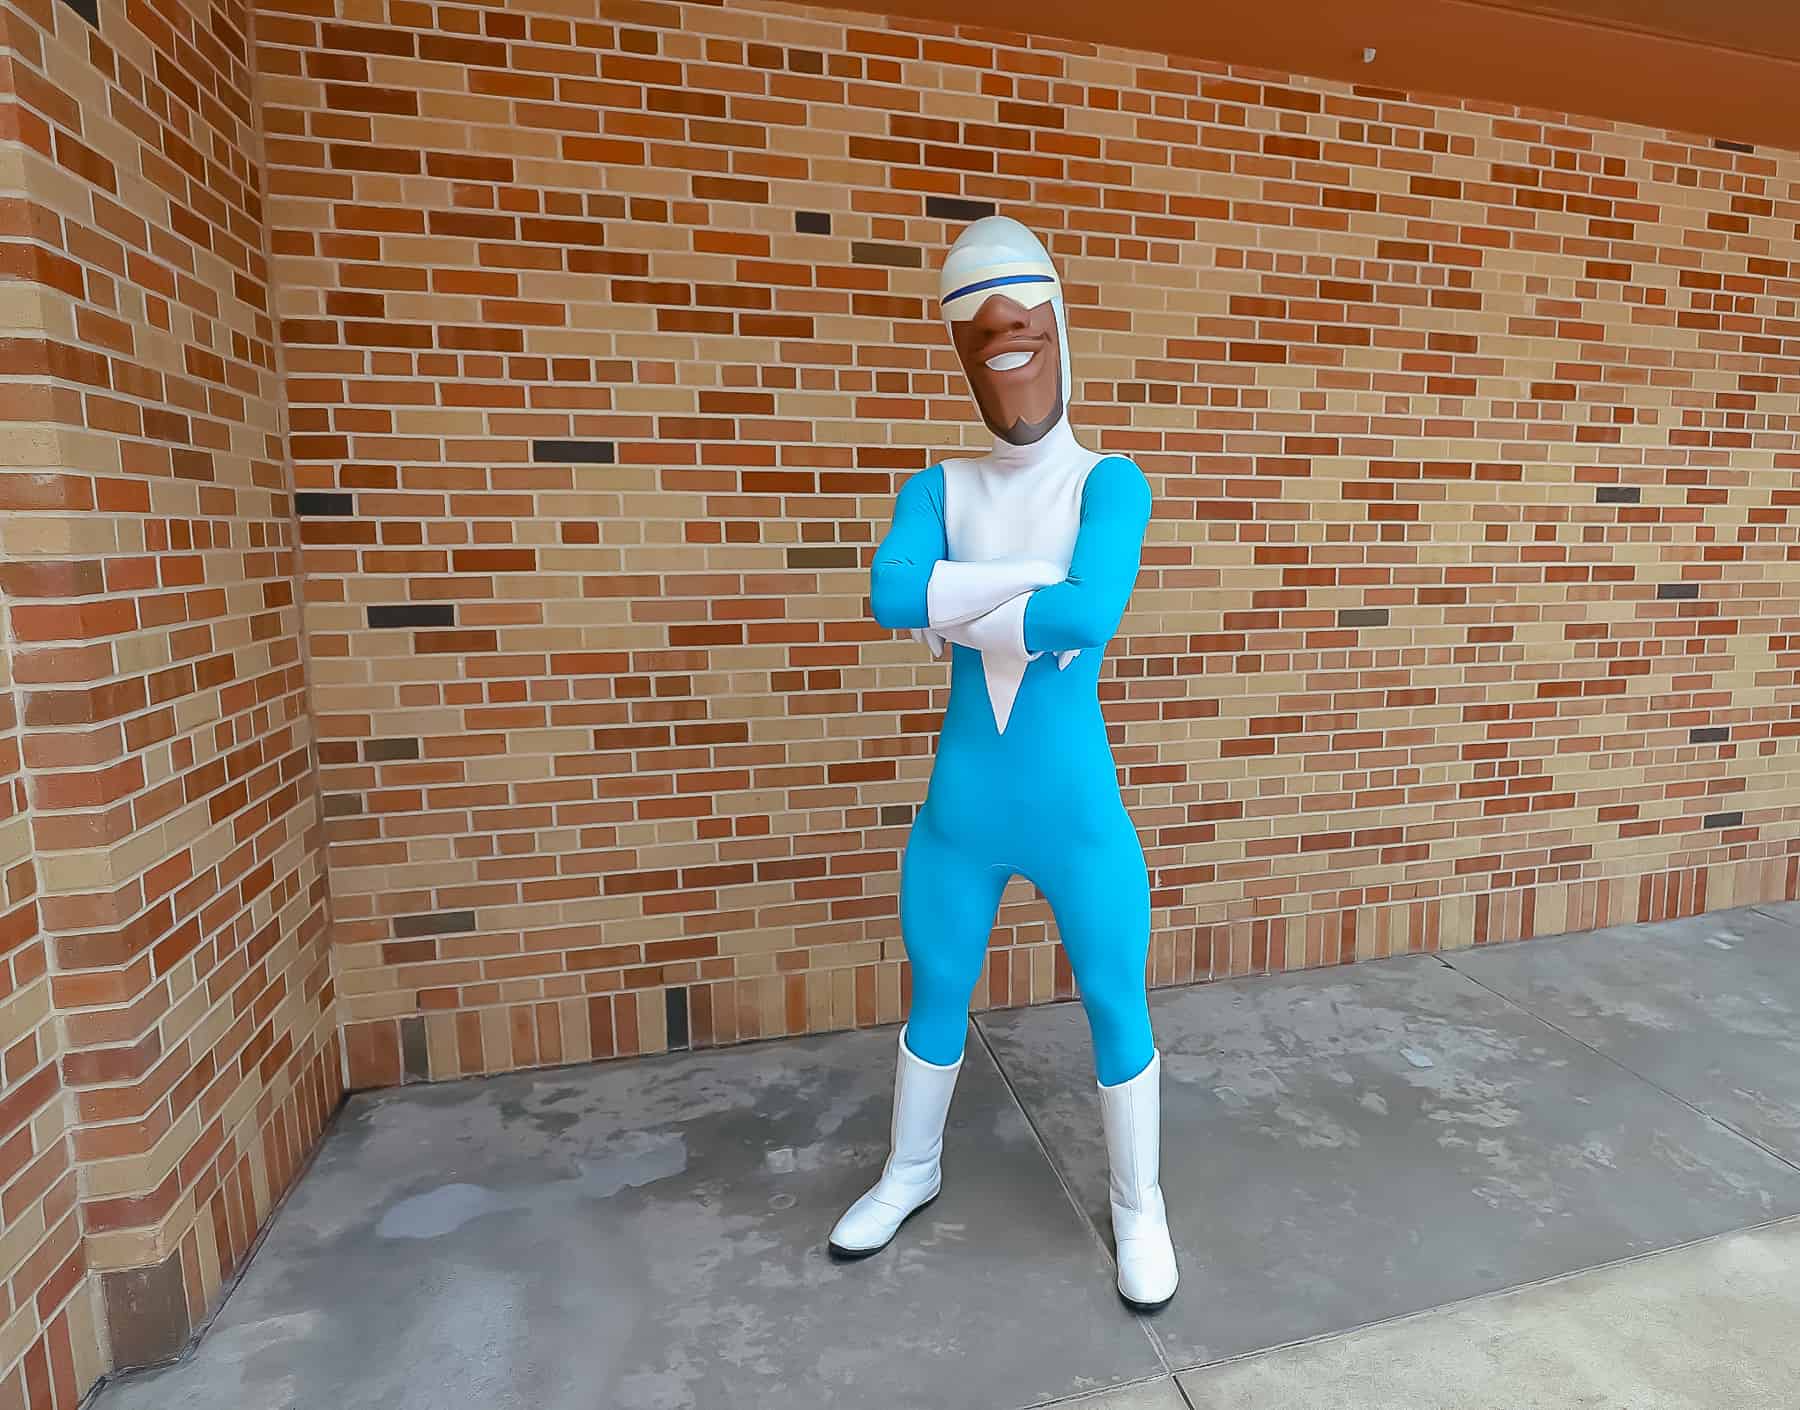 Frozone posing with his arms crossed in Municiberg Plaza at Disney's Hollywood Studios. 